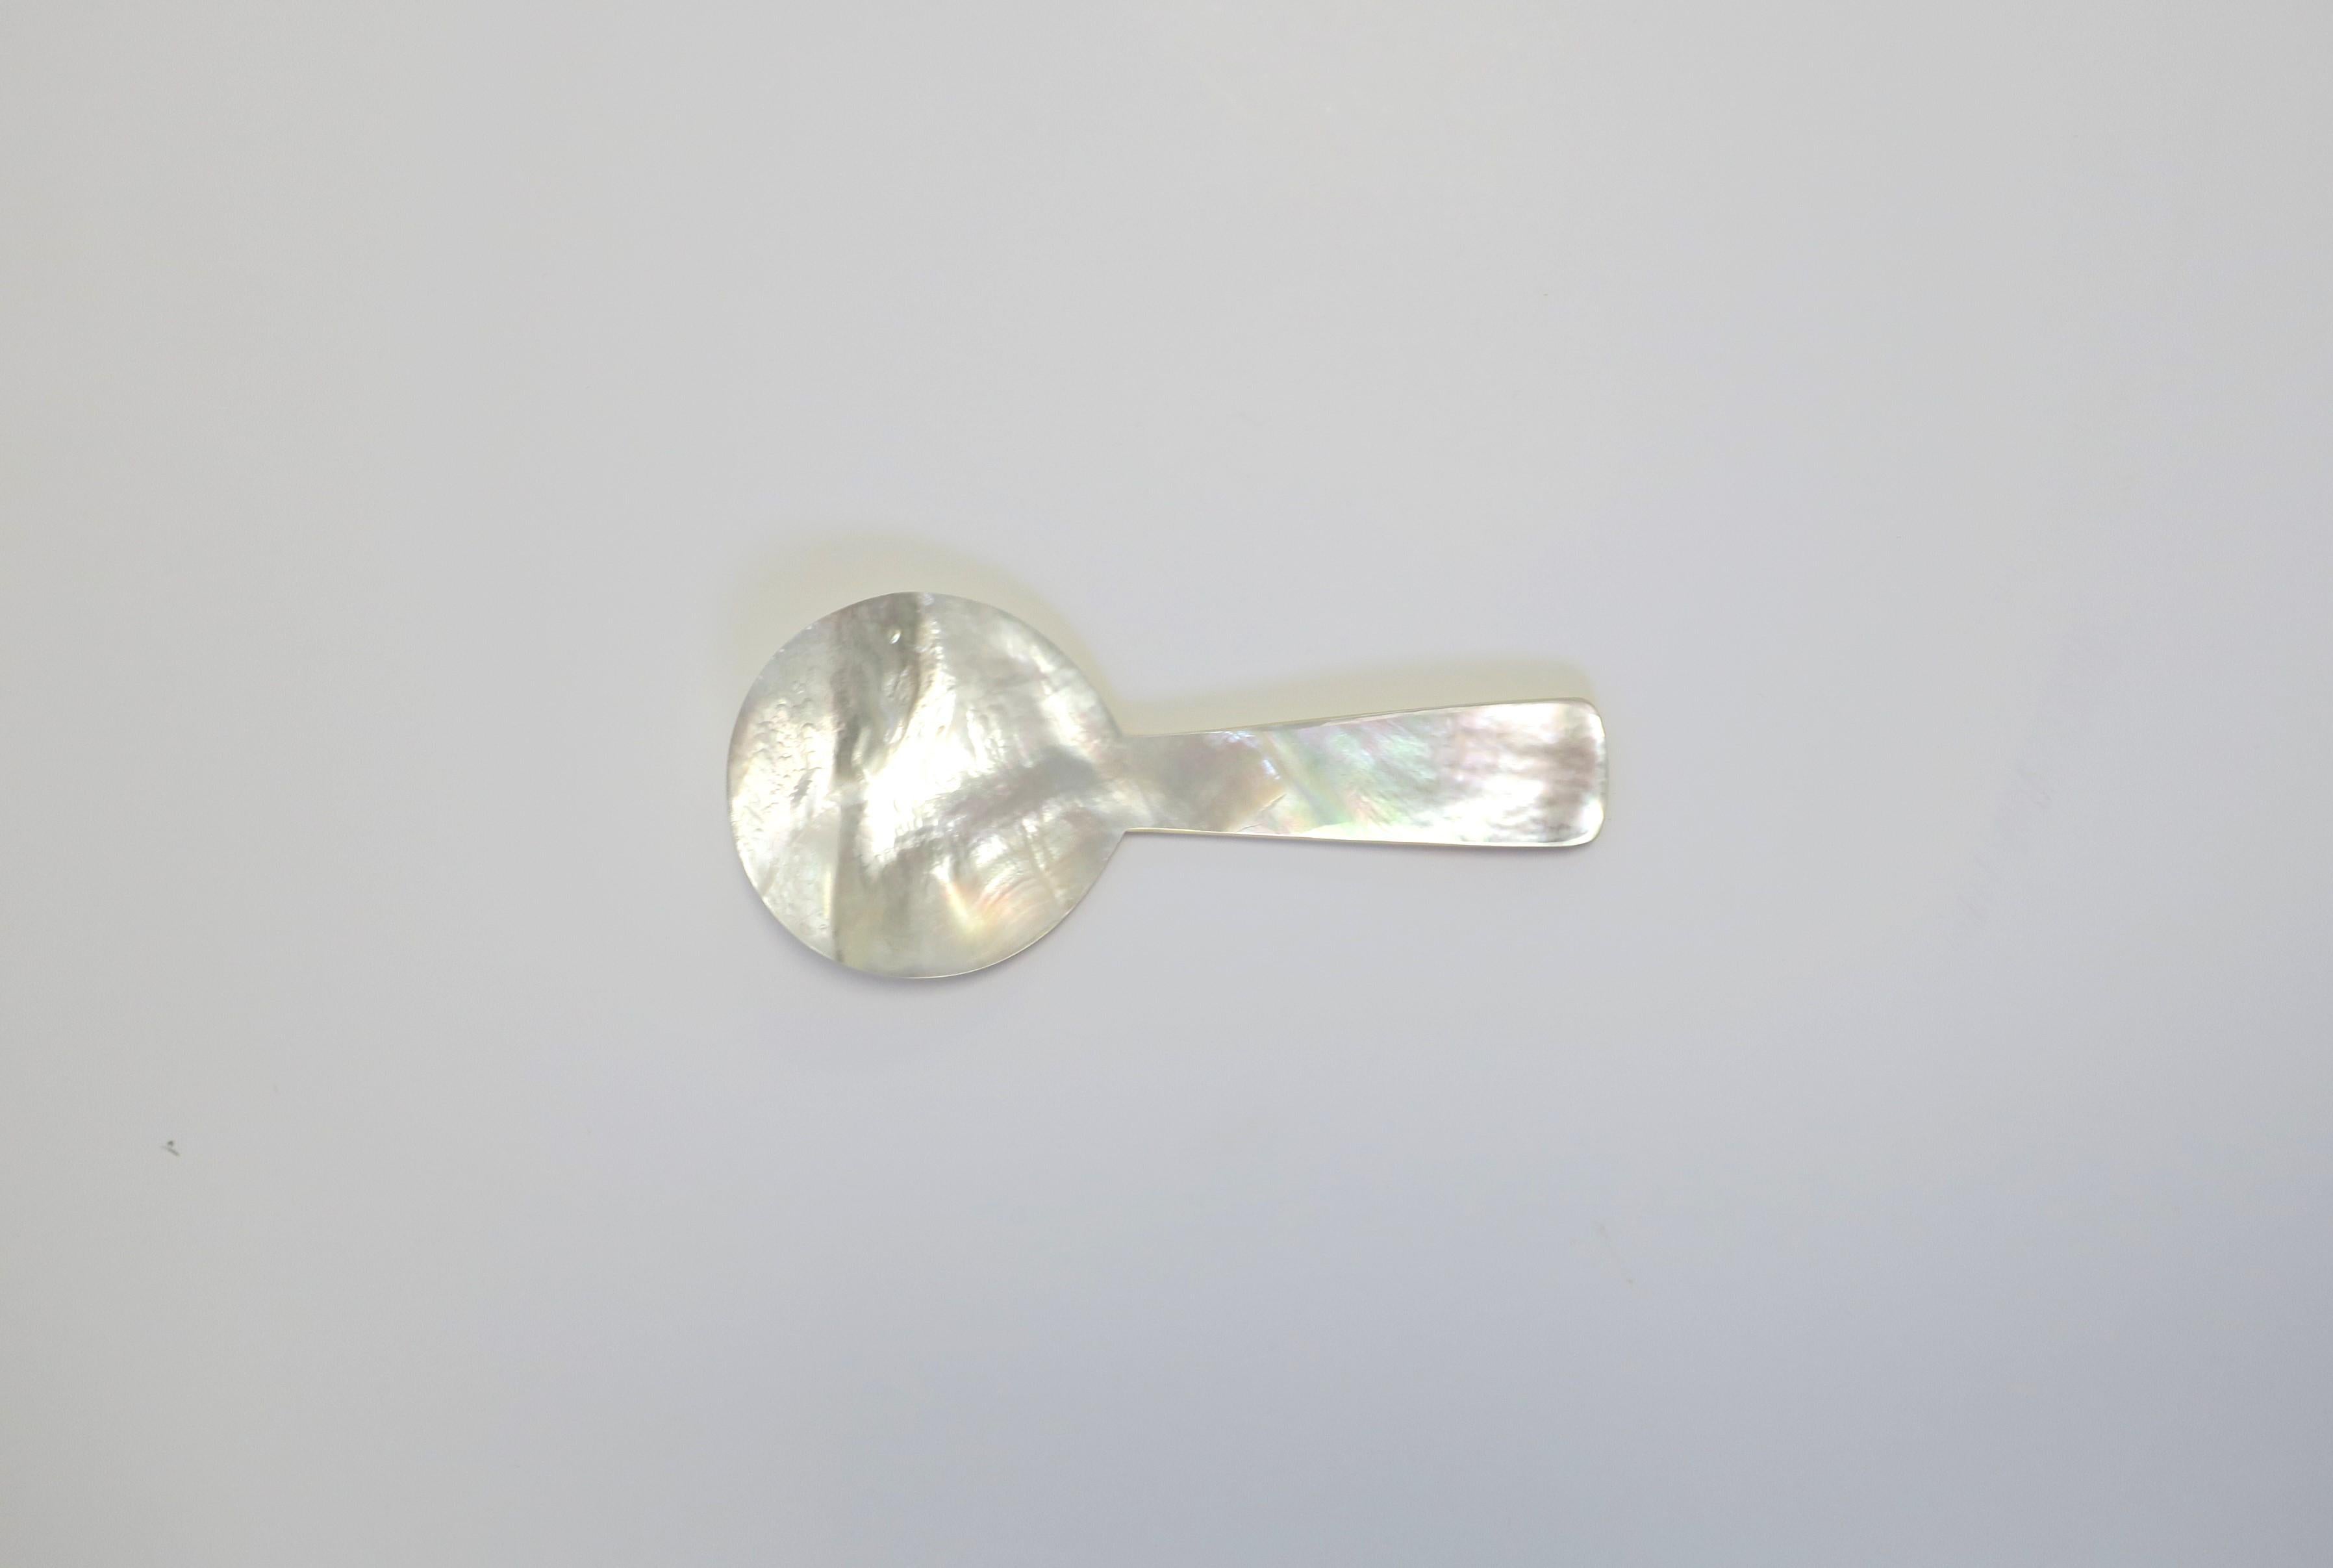 mother of pearl serving spoon